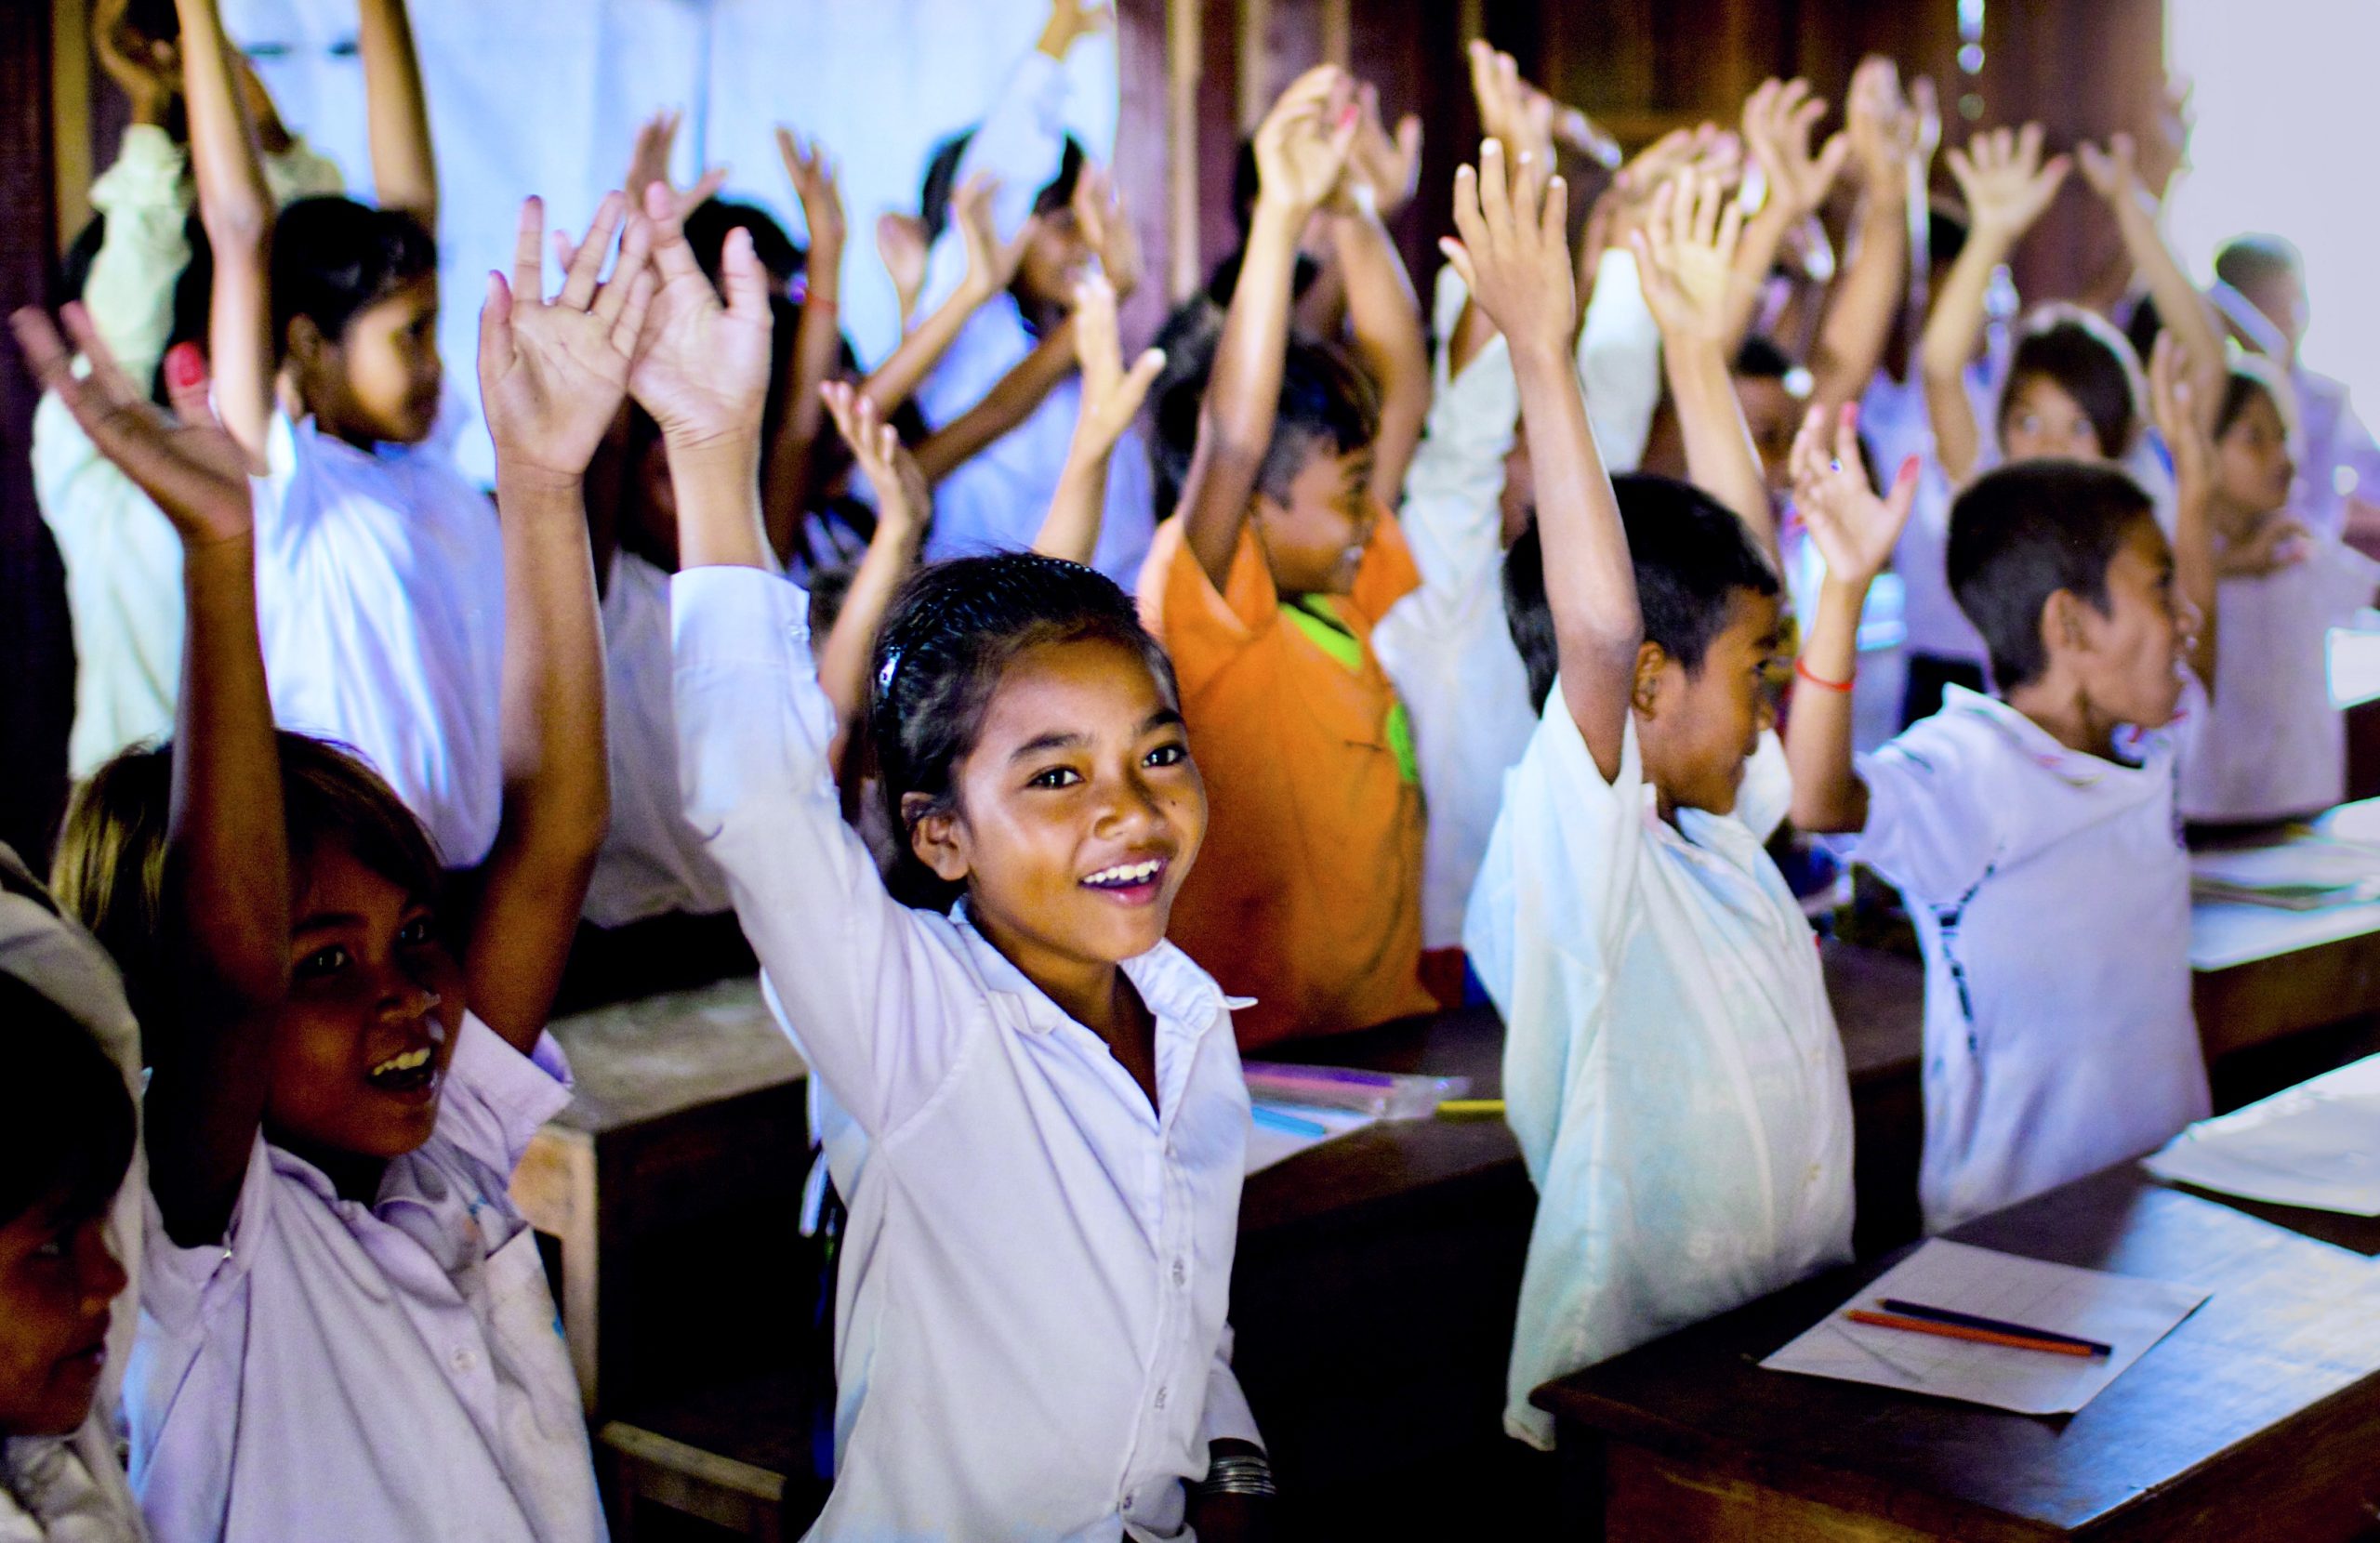 Building classrooms of hope from recycled plastic waste in South East Asia